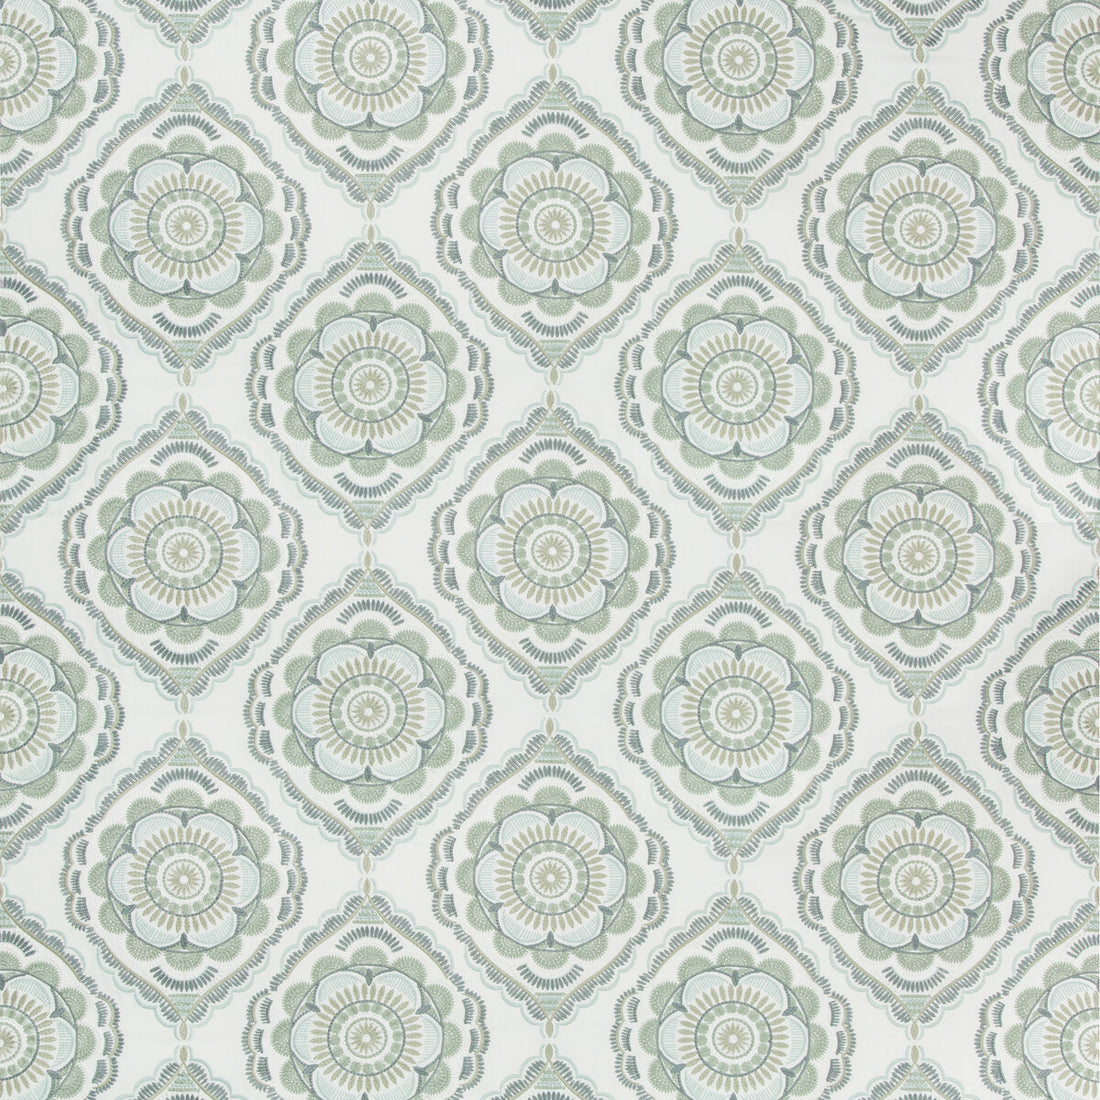 Monterey Emb fabric in sea mist color - pattern 2017170.123.0 - by Lee Jofa in the Westport collection